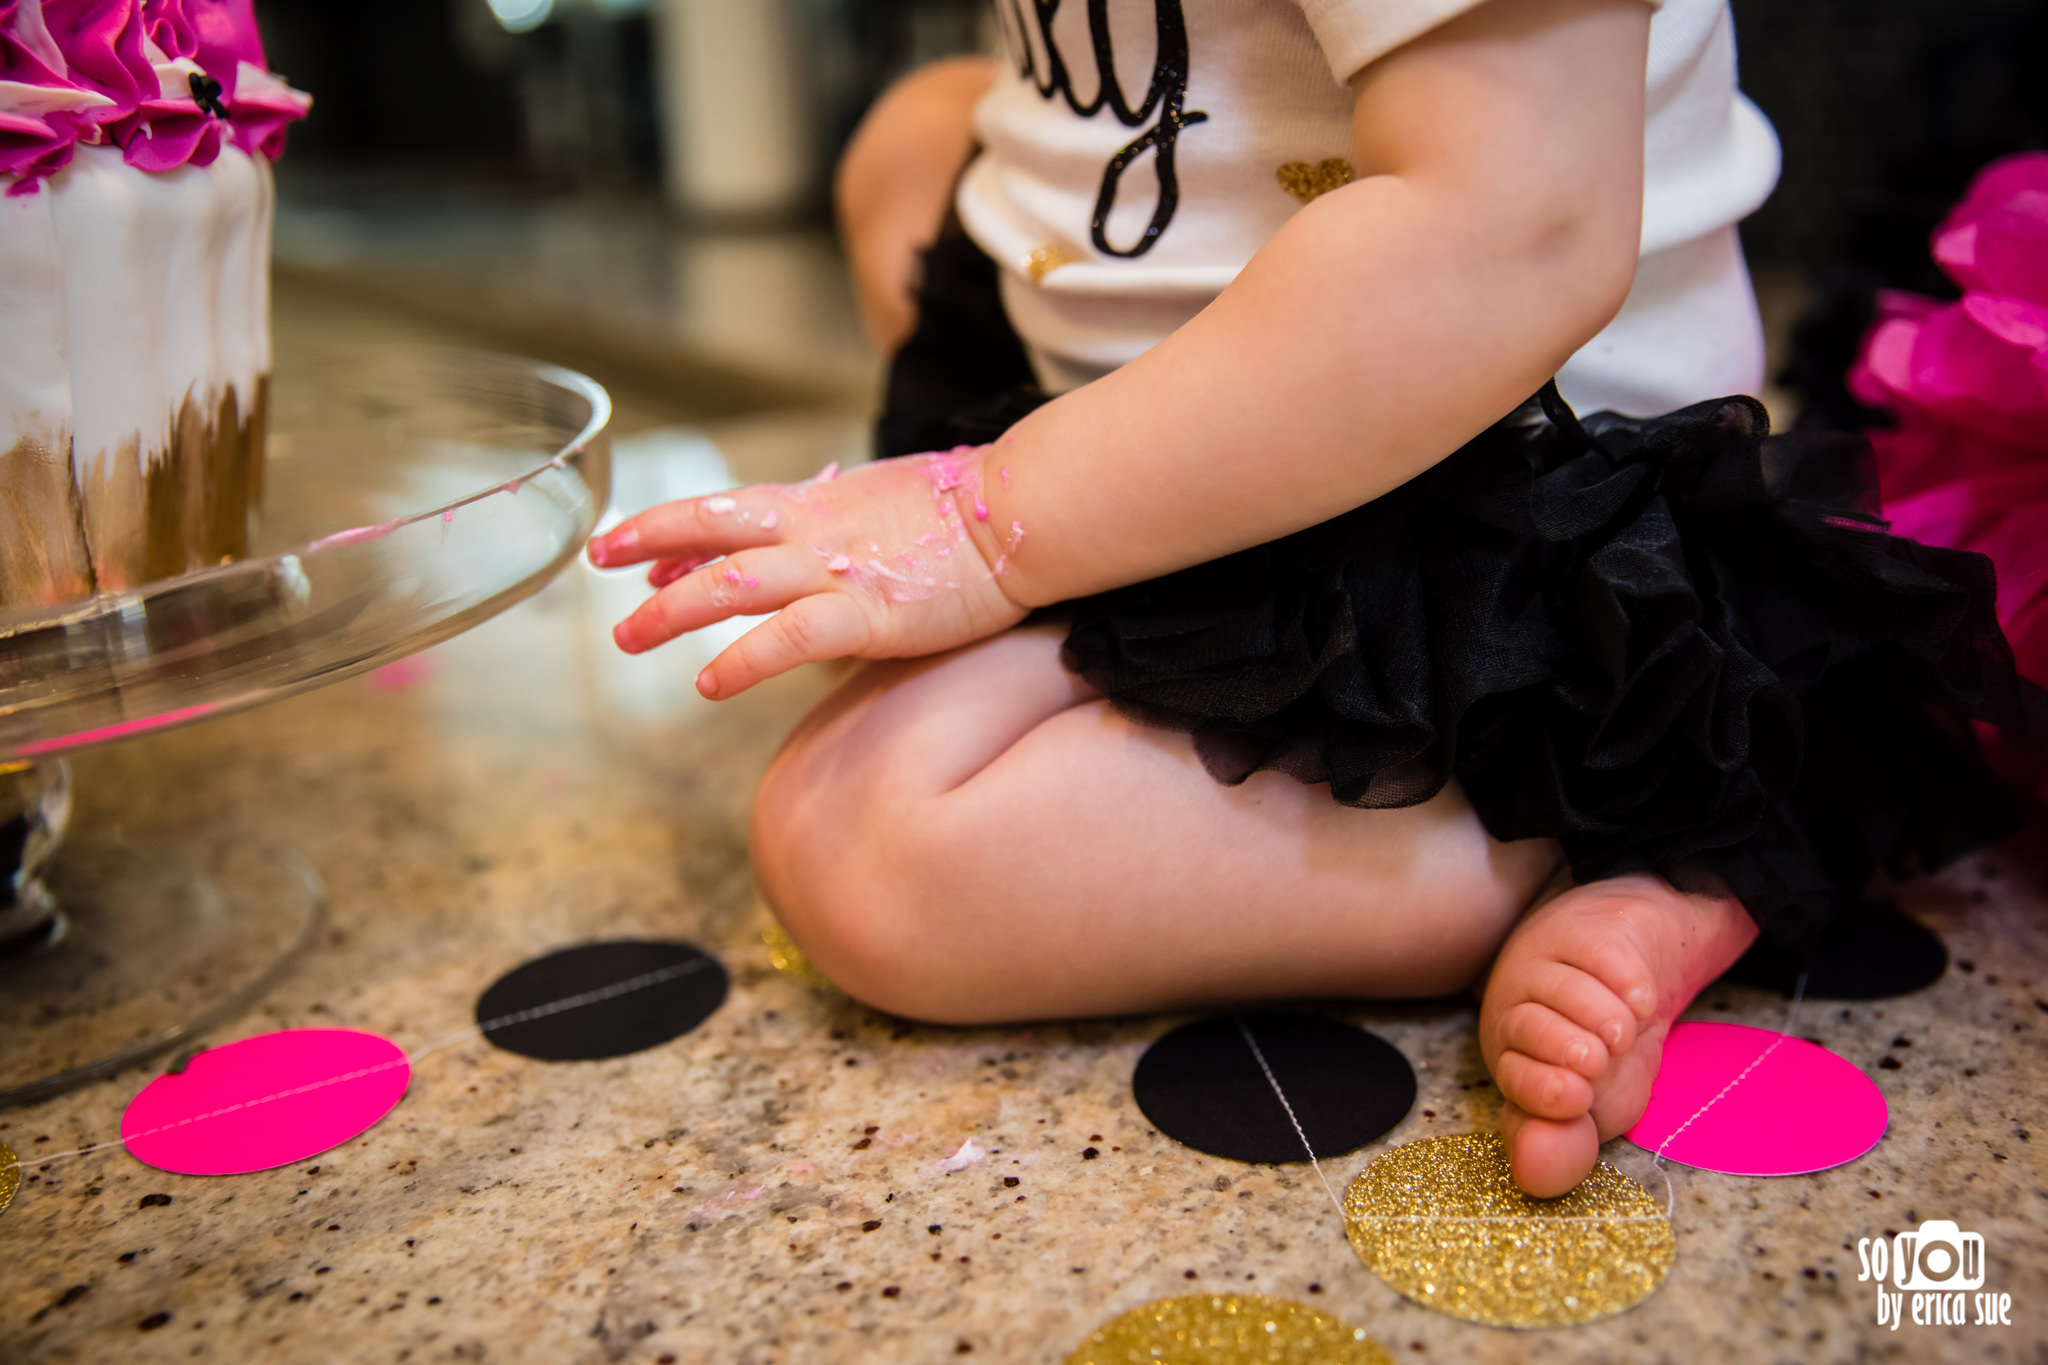 so-you-by-erica-sue-hollywood-fl-photographer-in-home-lifestyle-1st-birthday-cake-smash-3961.jpg